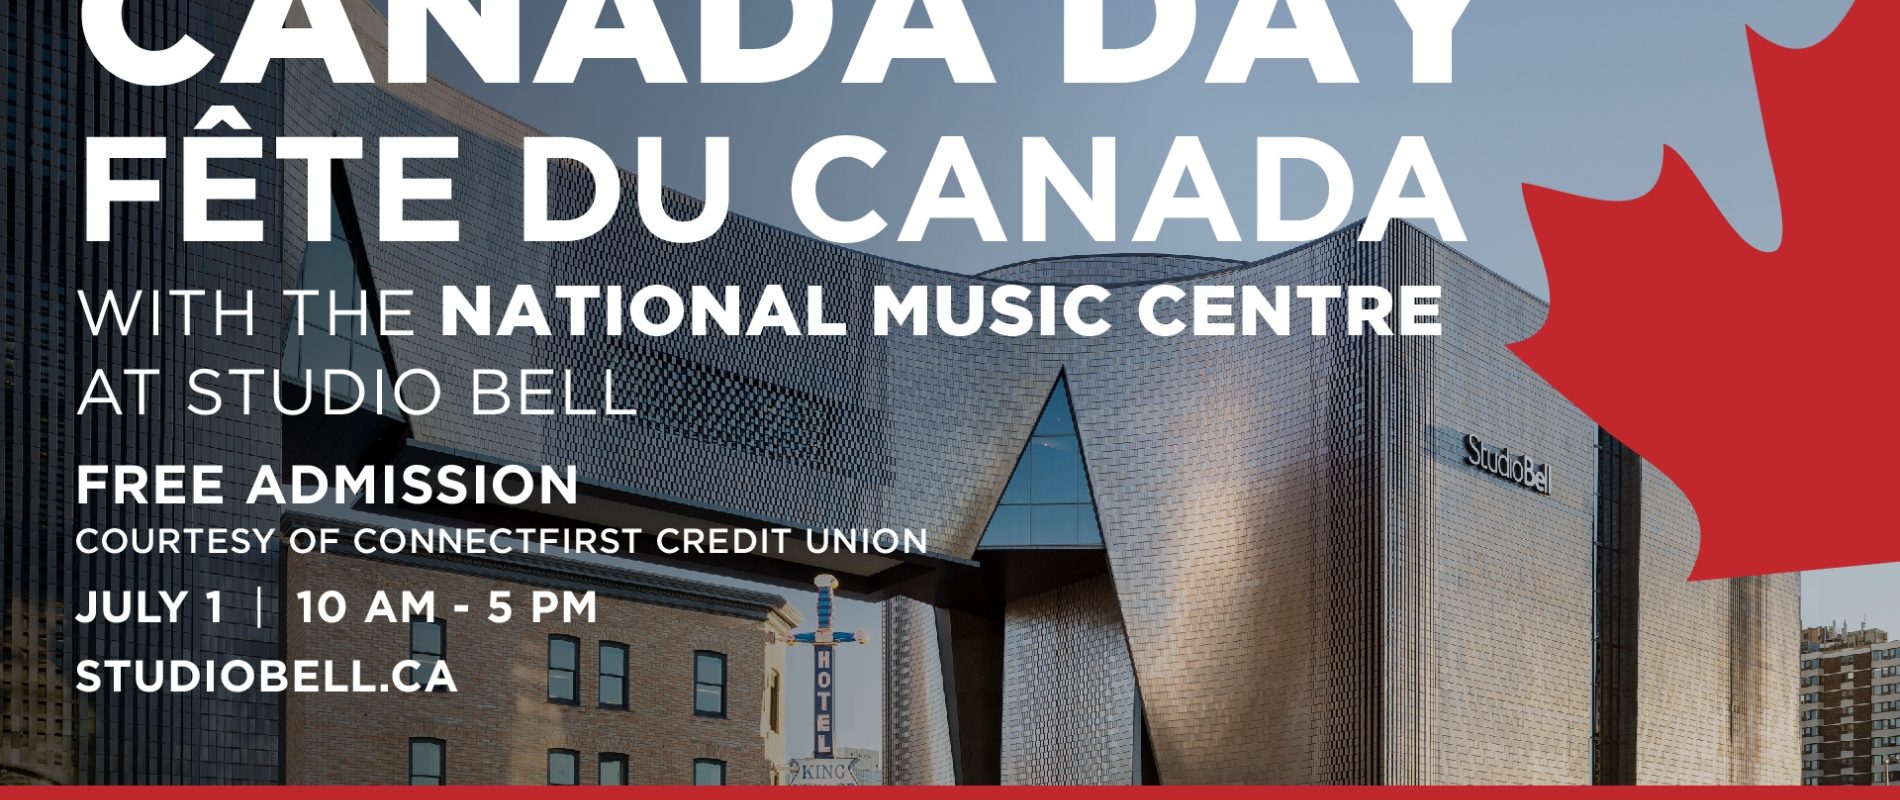 National Music Centre Celebrates Canada Day with Free Admission on July 1, Courtesy of connectFirst Credit Union